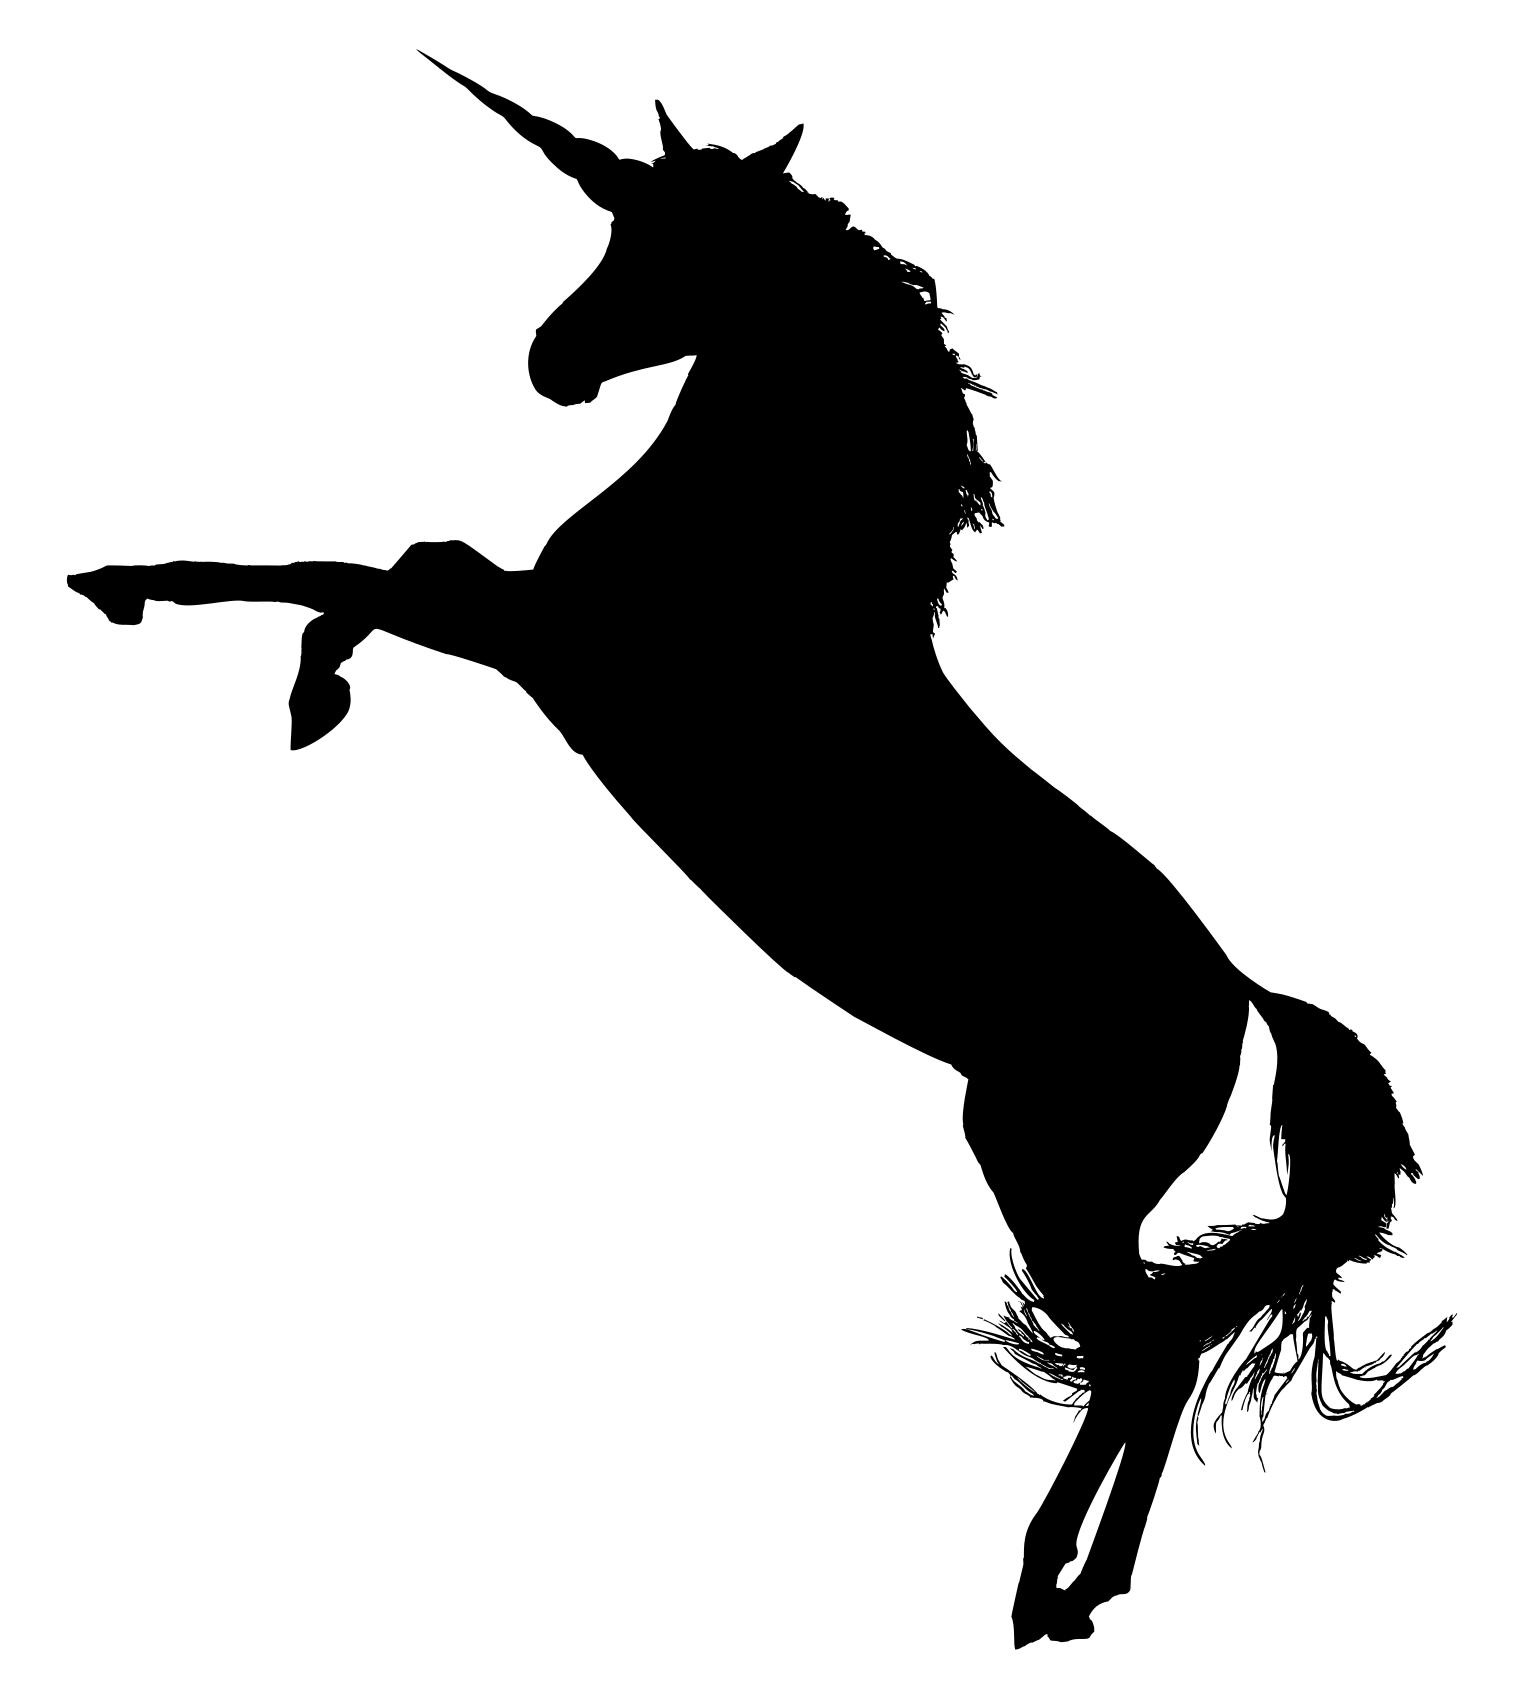 Unicorn Silhouette Clip Art at GetDrawings Free download